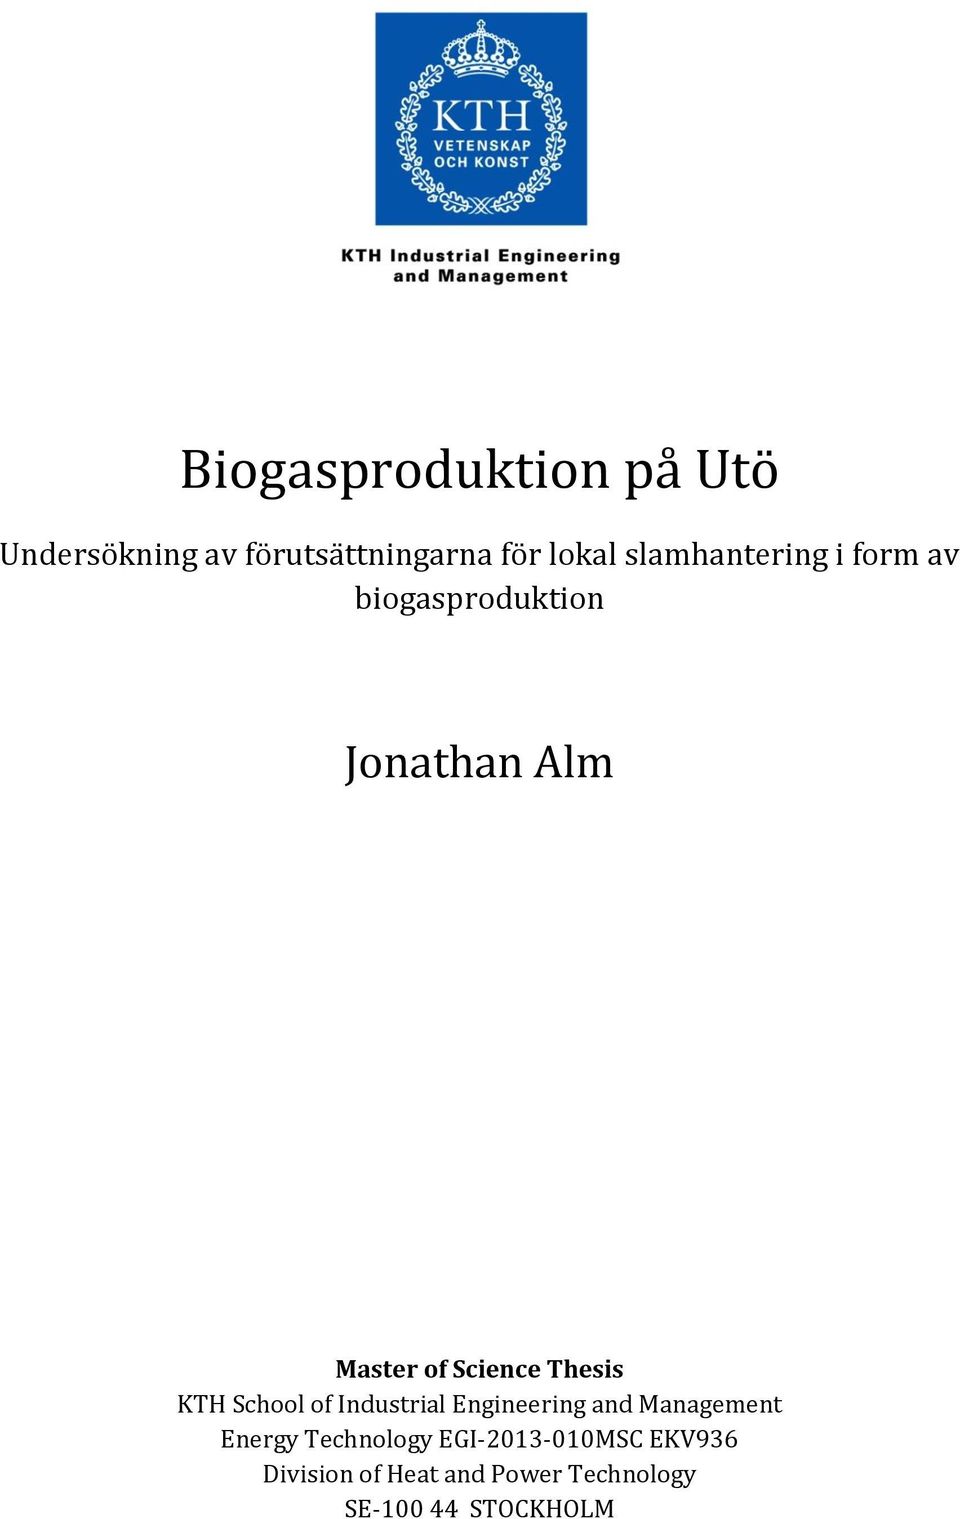 Thesis KTH School of Industrial Engineering and Management Energy